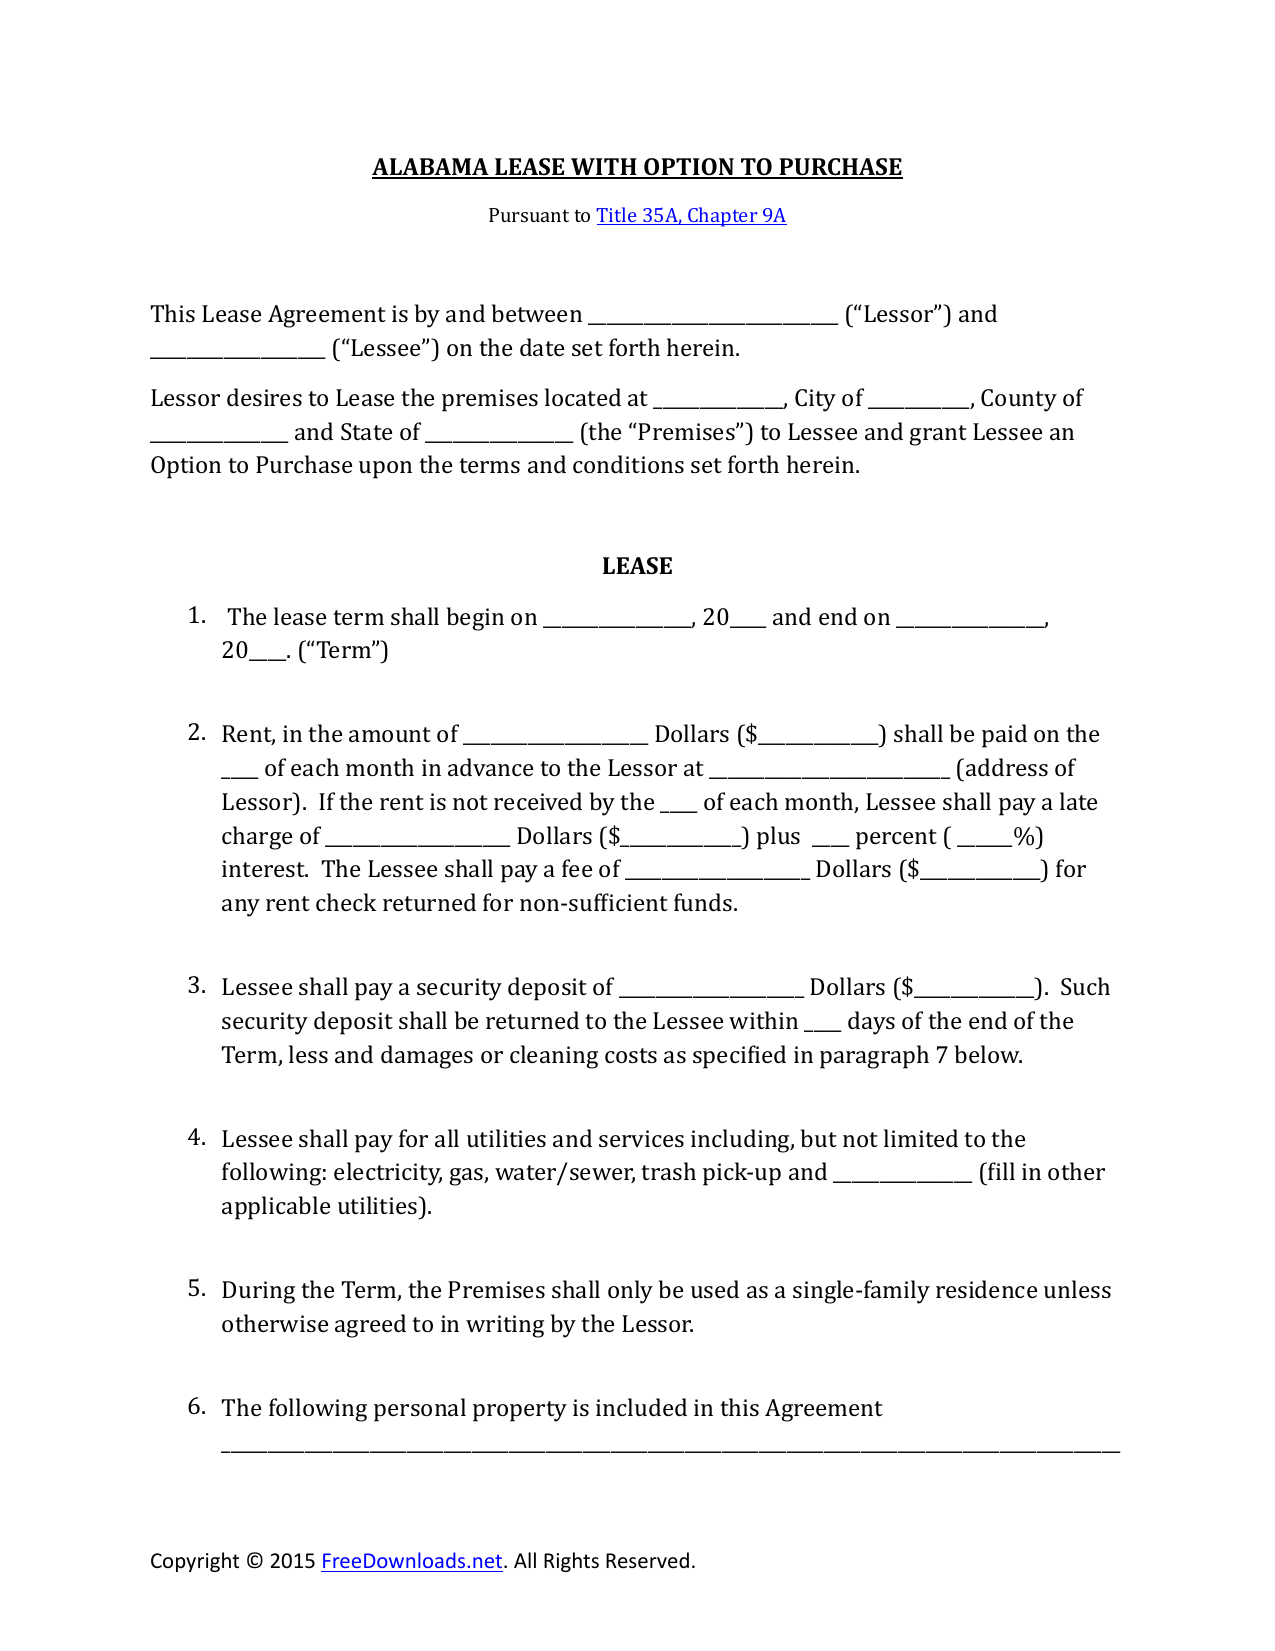 download alabama lease purchase rent to own agreement pdf rtf word freedownloads net